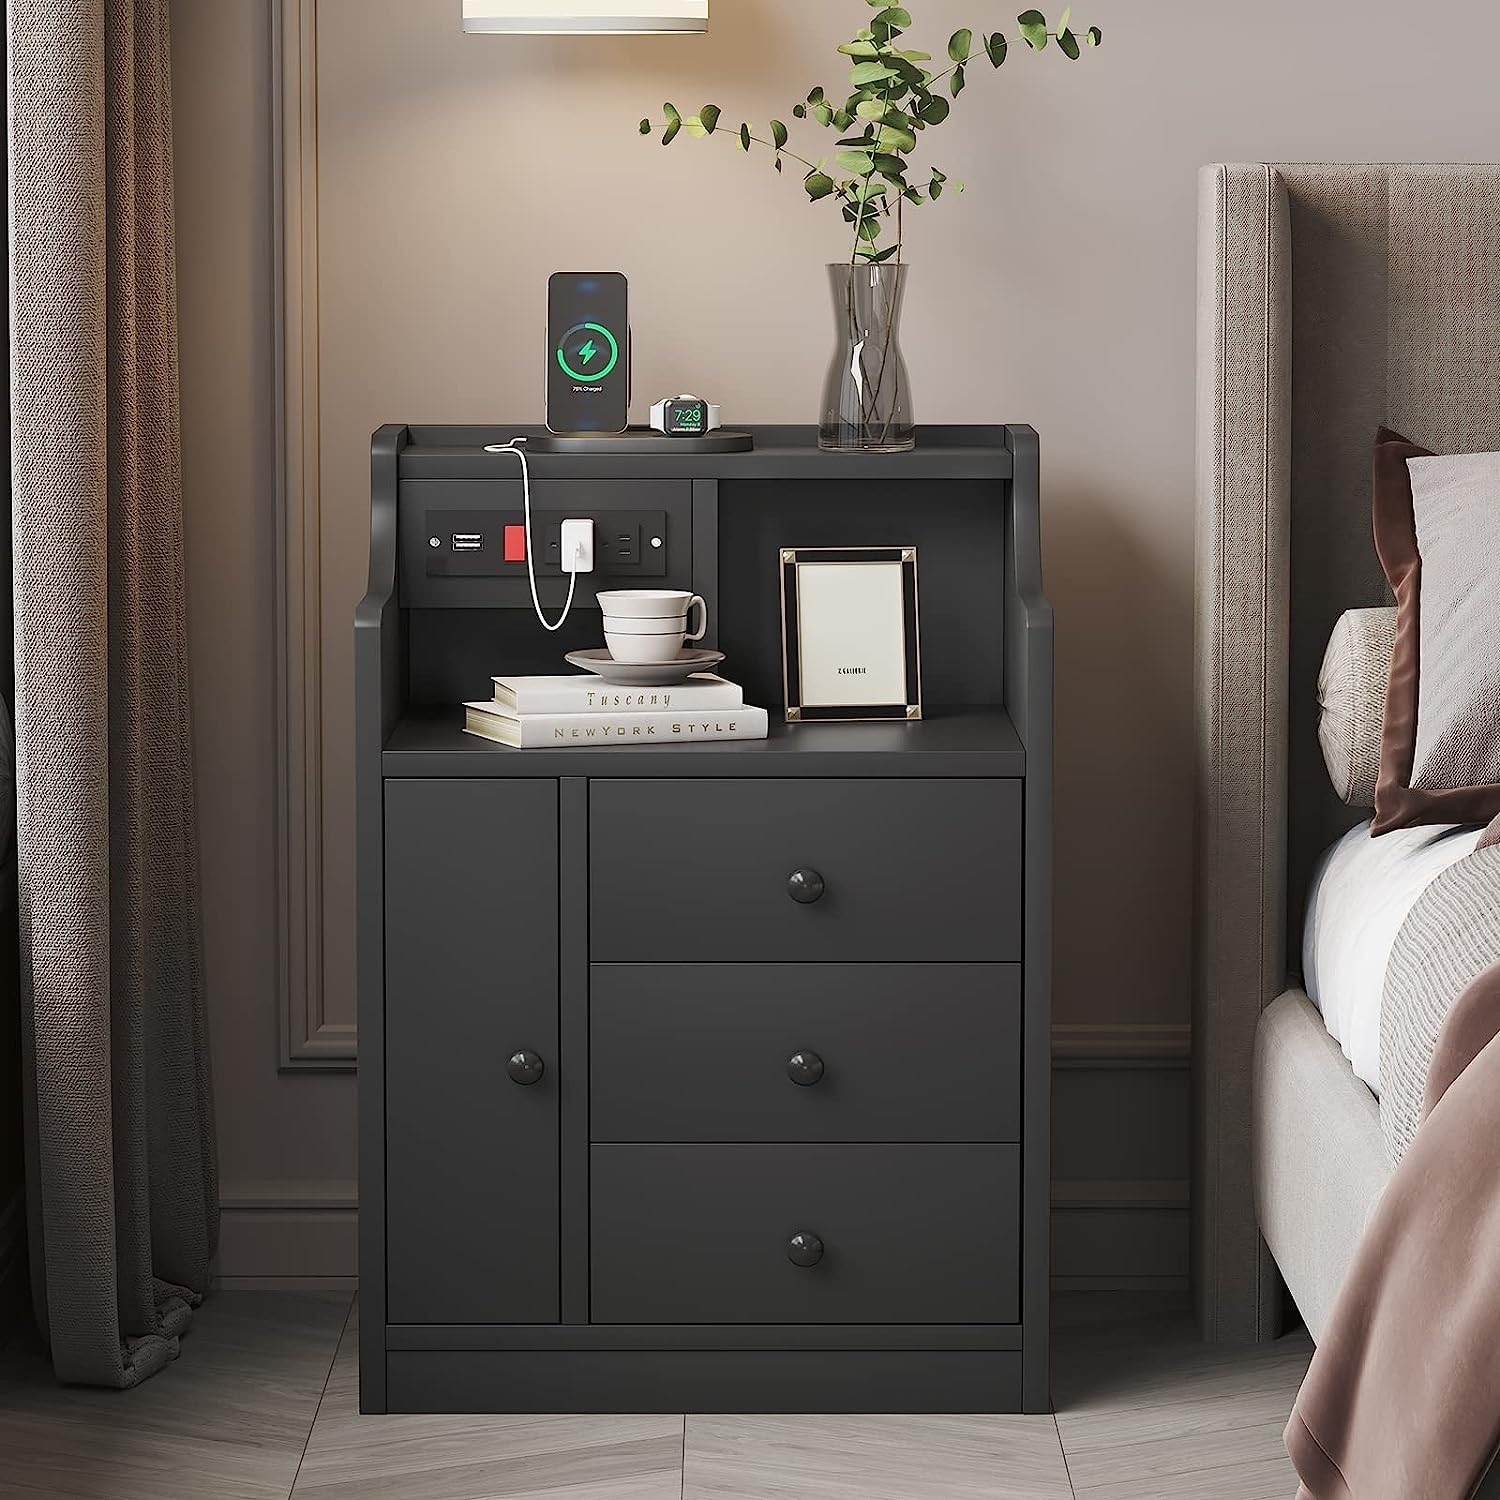 Bedside Table Smart Touch Mini Fridge Nightstand with Wireless